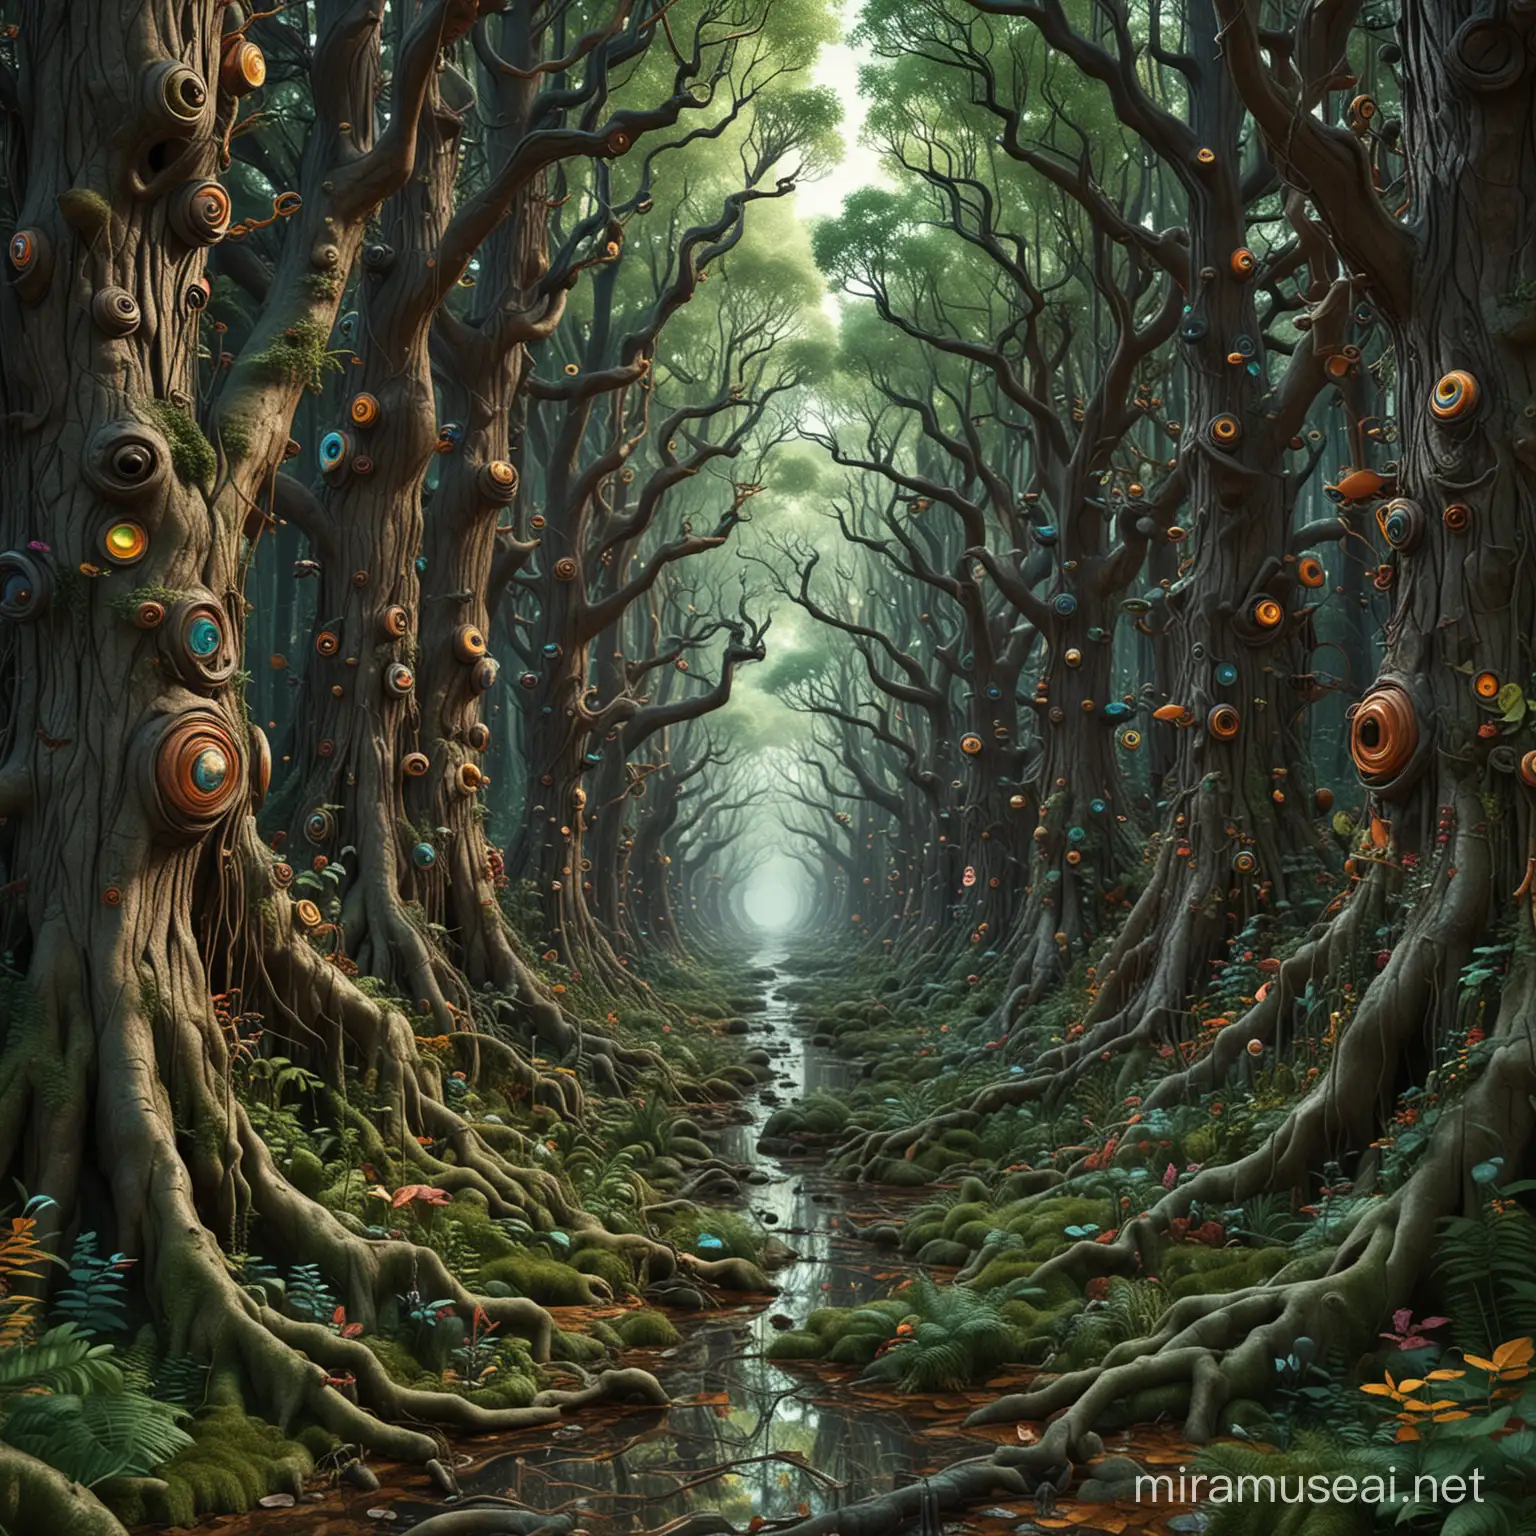 Psychedelic Surreal Forest with Twisted Organic Trees and Morbid Atmosphere